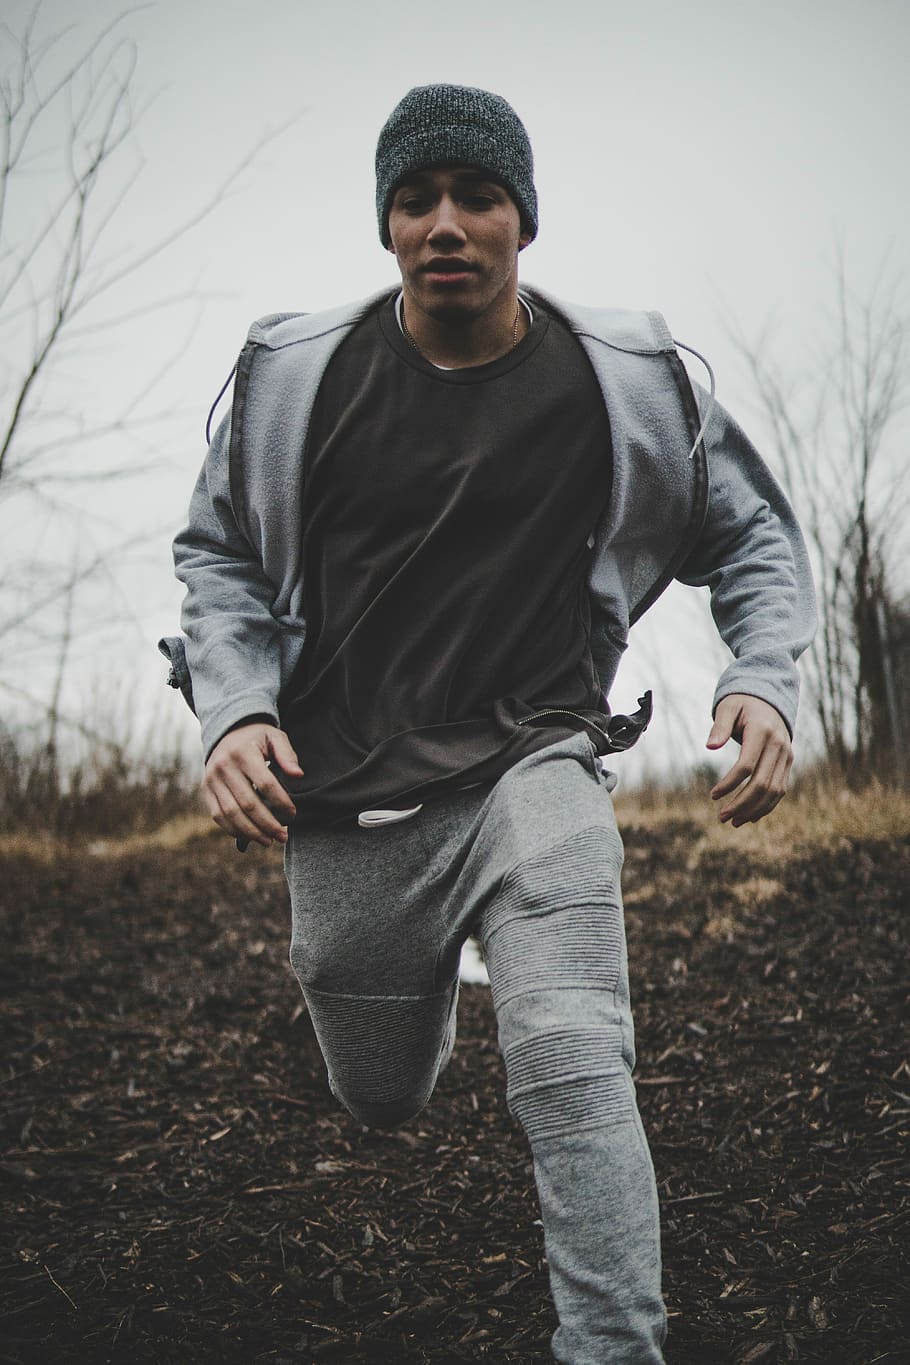 man wearing black shirt and gray jacket with pants while running into plain field, man running on brown soil near bare trees